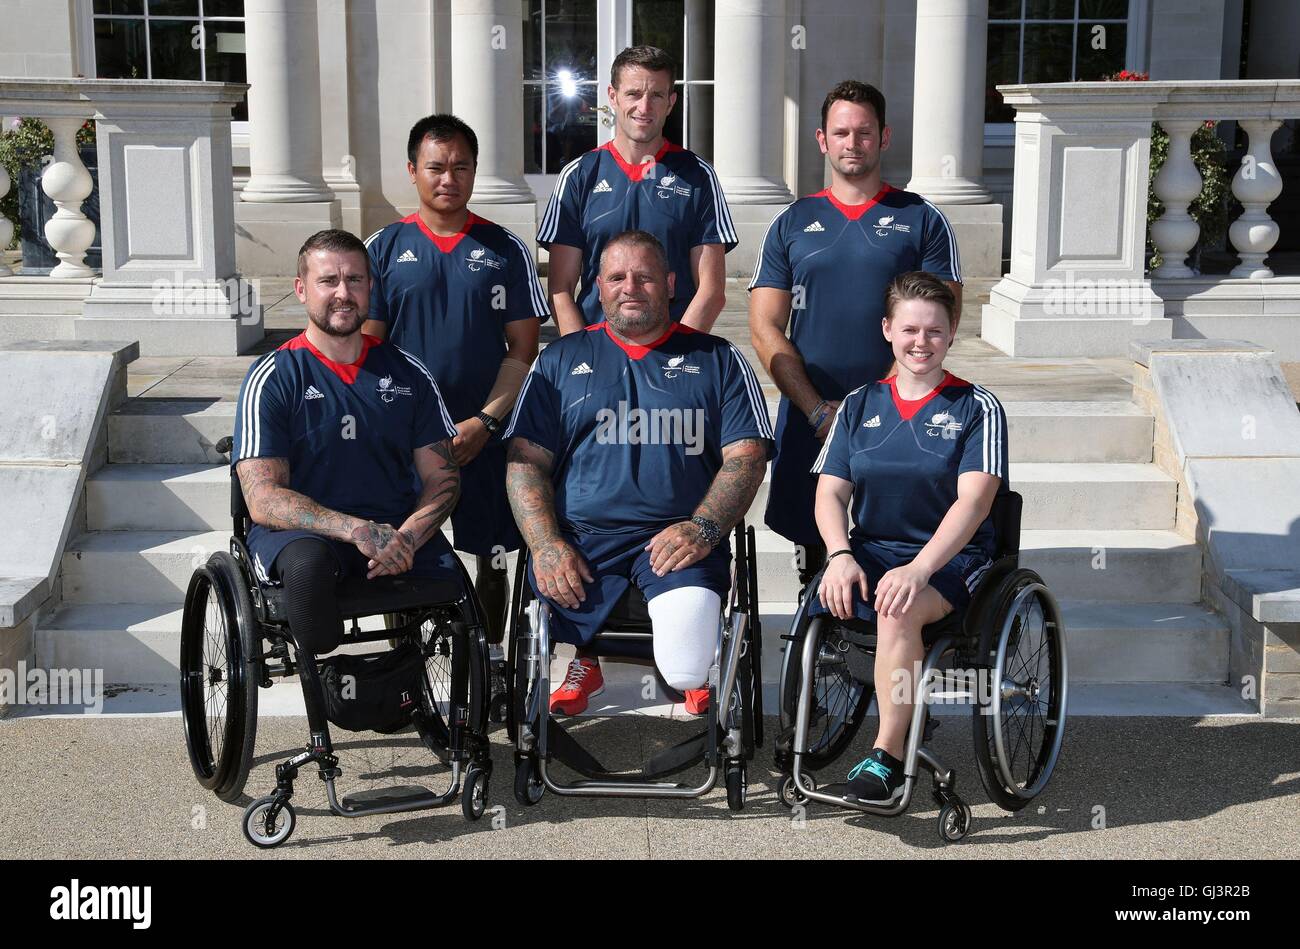 (Clockwise from top left) Help for Heroes Military Athletes Vinod Budhathoki, Steven Crowley, Steve Arnold, Stuart Robinson, Steve Gill and Nikki Paterson, who have been chosen for the British Paralympic Association's Paralympic Inspiration Programme for the Rio 2016 Paralympic games, pose for a photograph in the grounds of Tedworth House in Wiltshire. Stock Photo